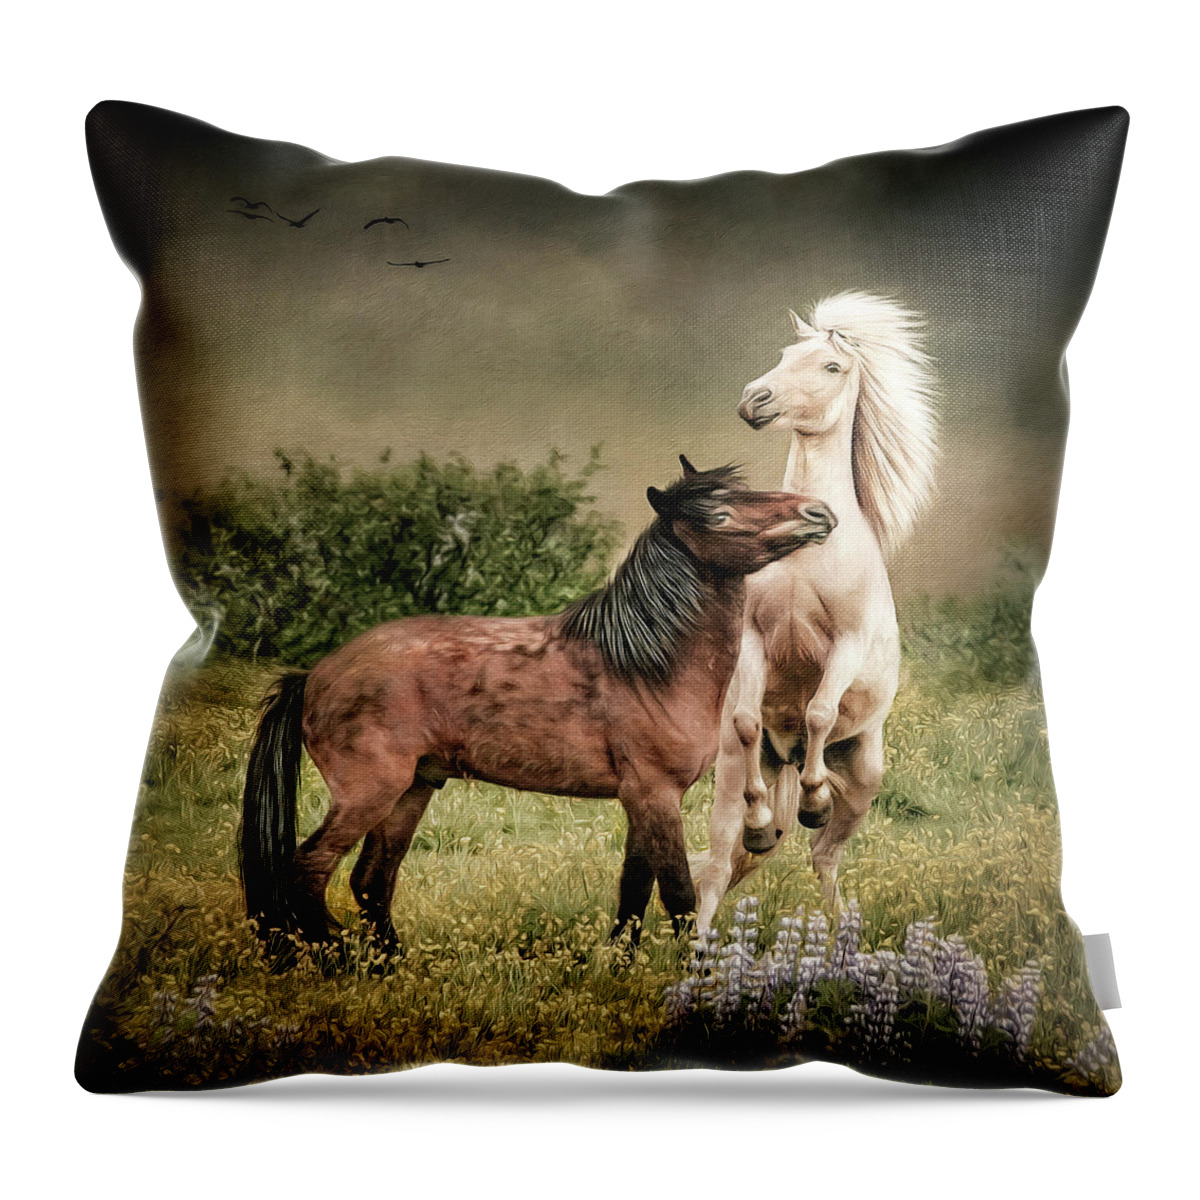 Iceland Throw Pillow featuring the digital art Rough Housing by Maggy Pease